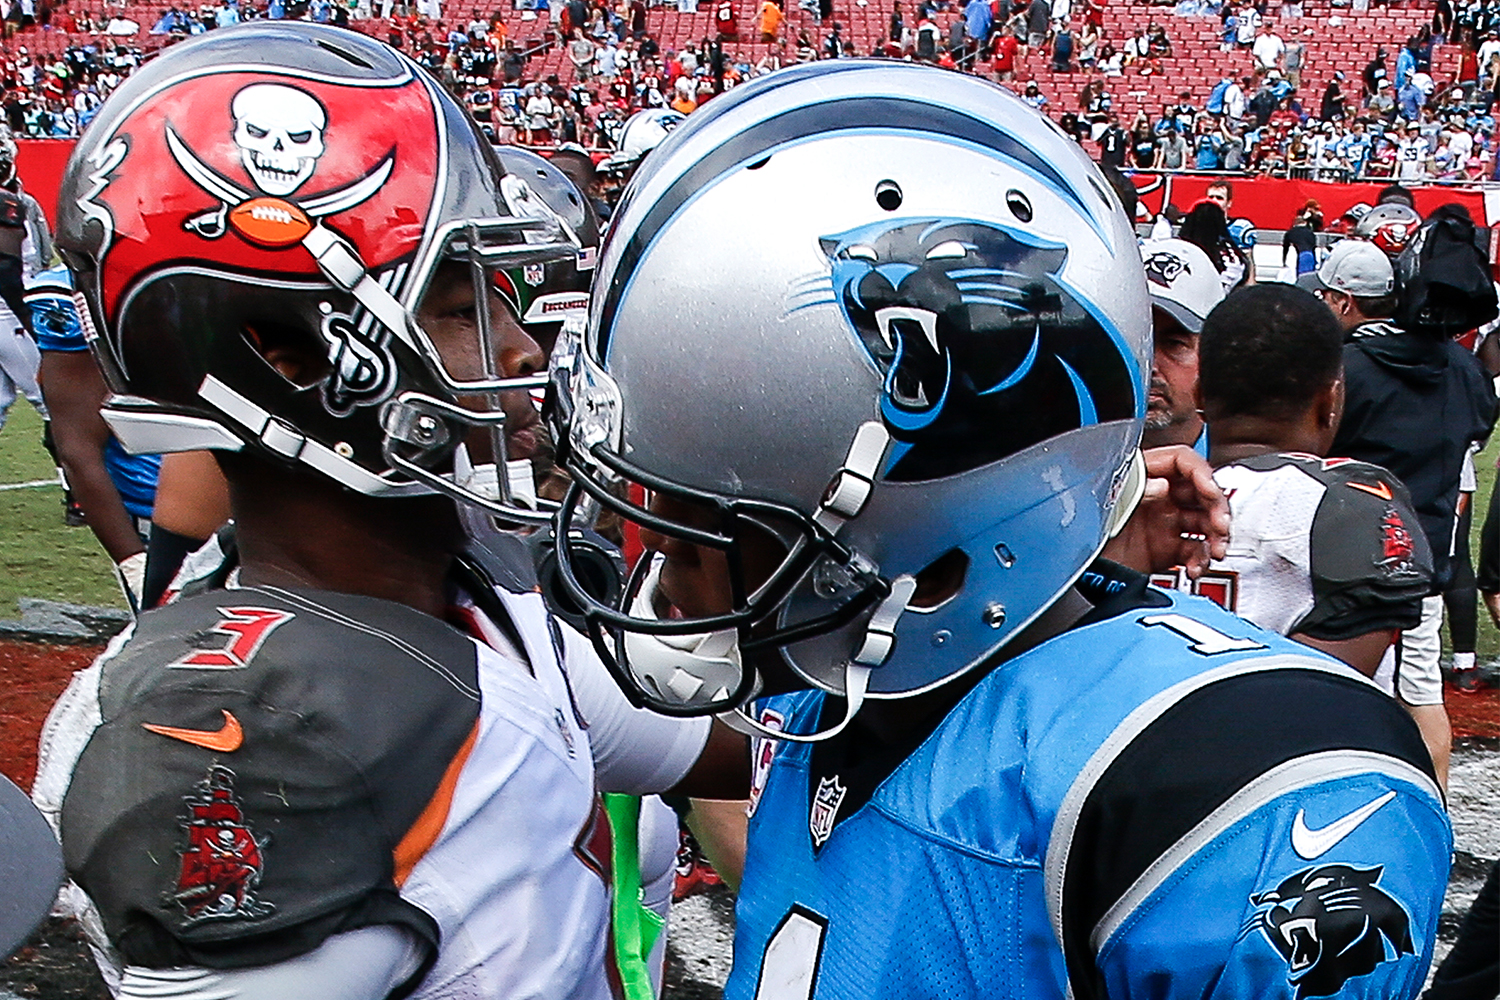 Cam Newton and Jameis Winston May Not Have Teams "For a While"